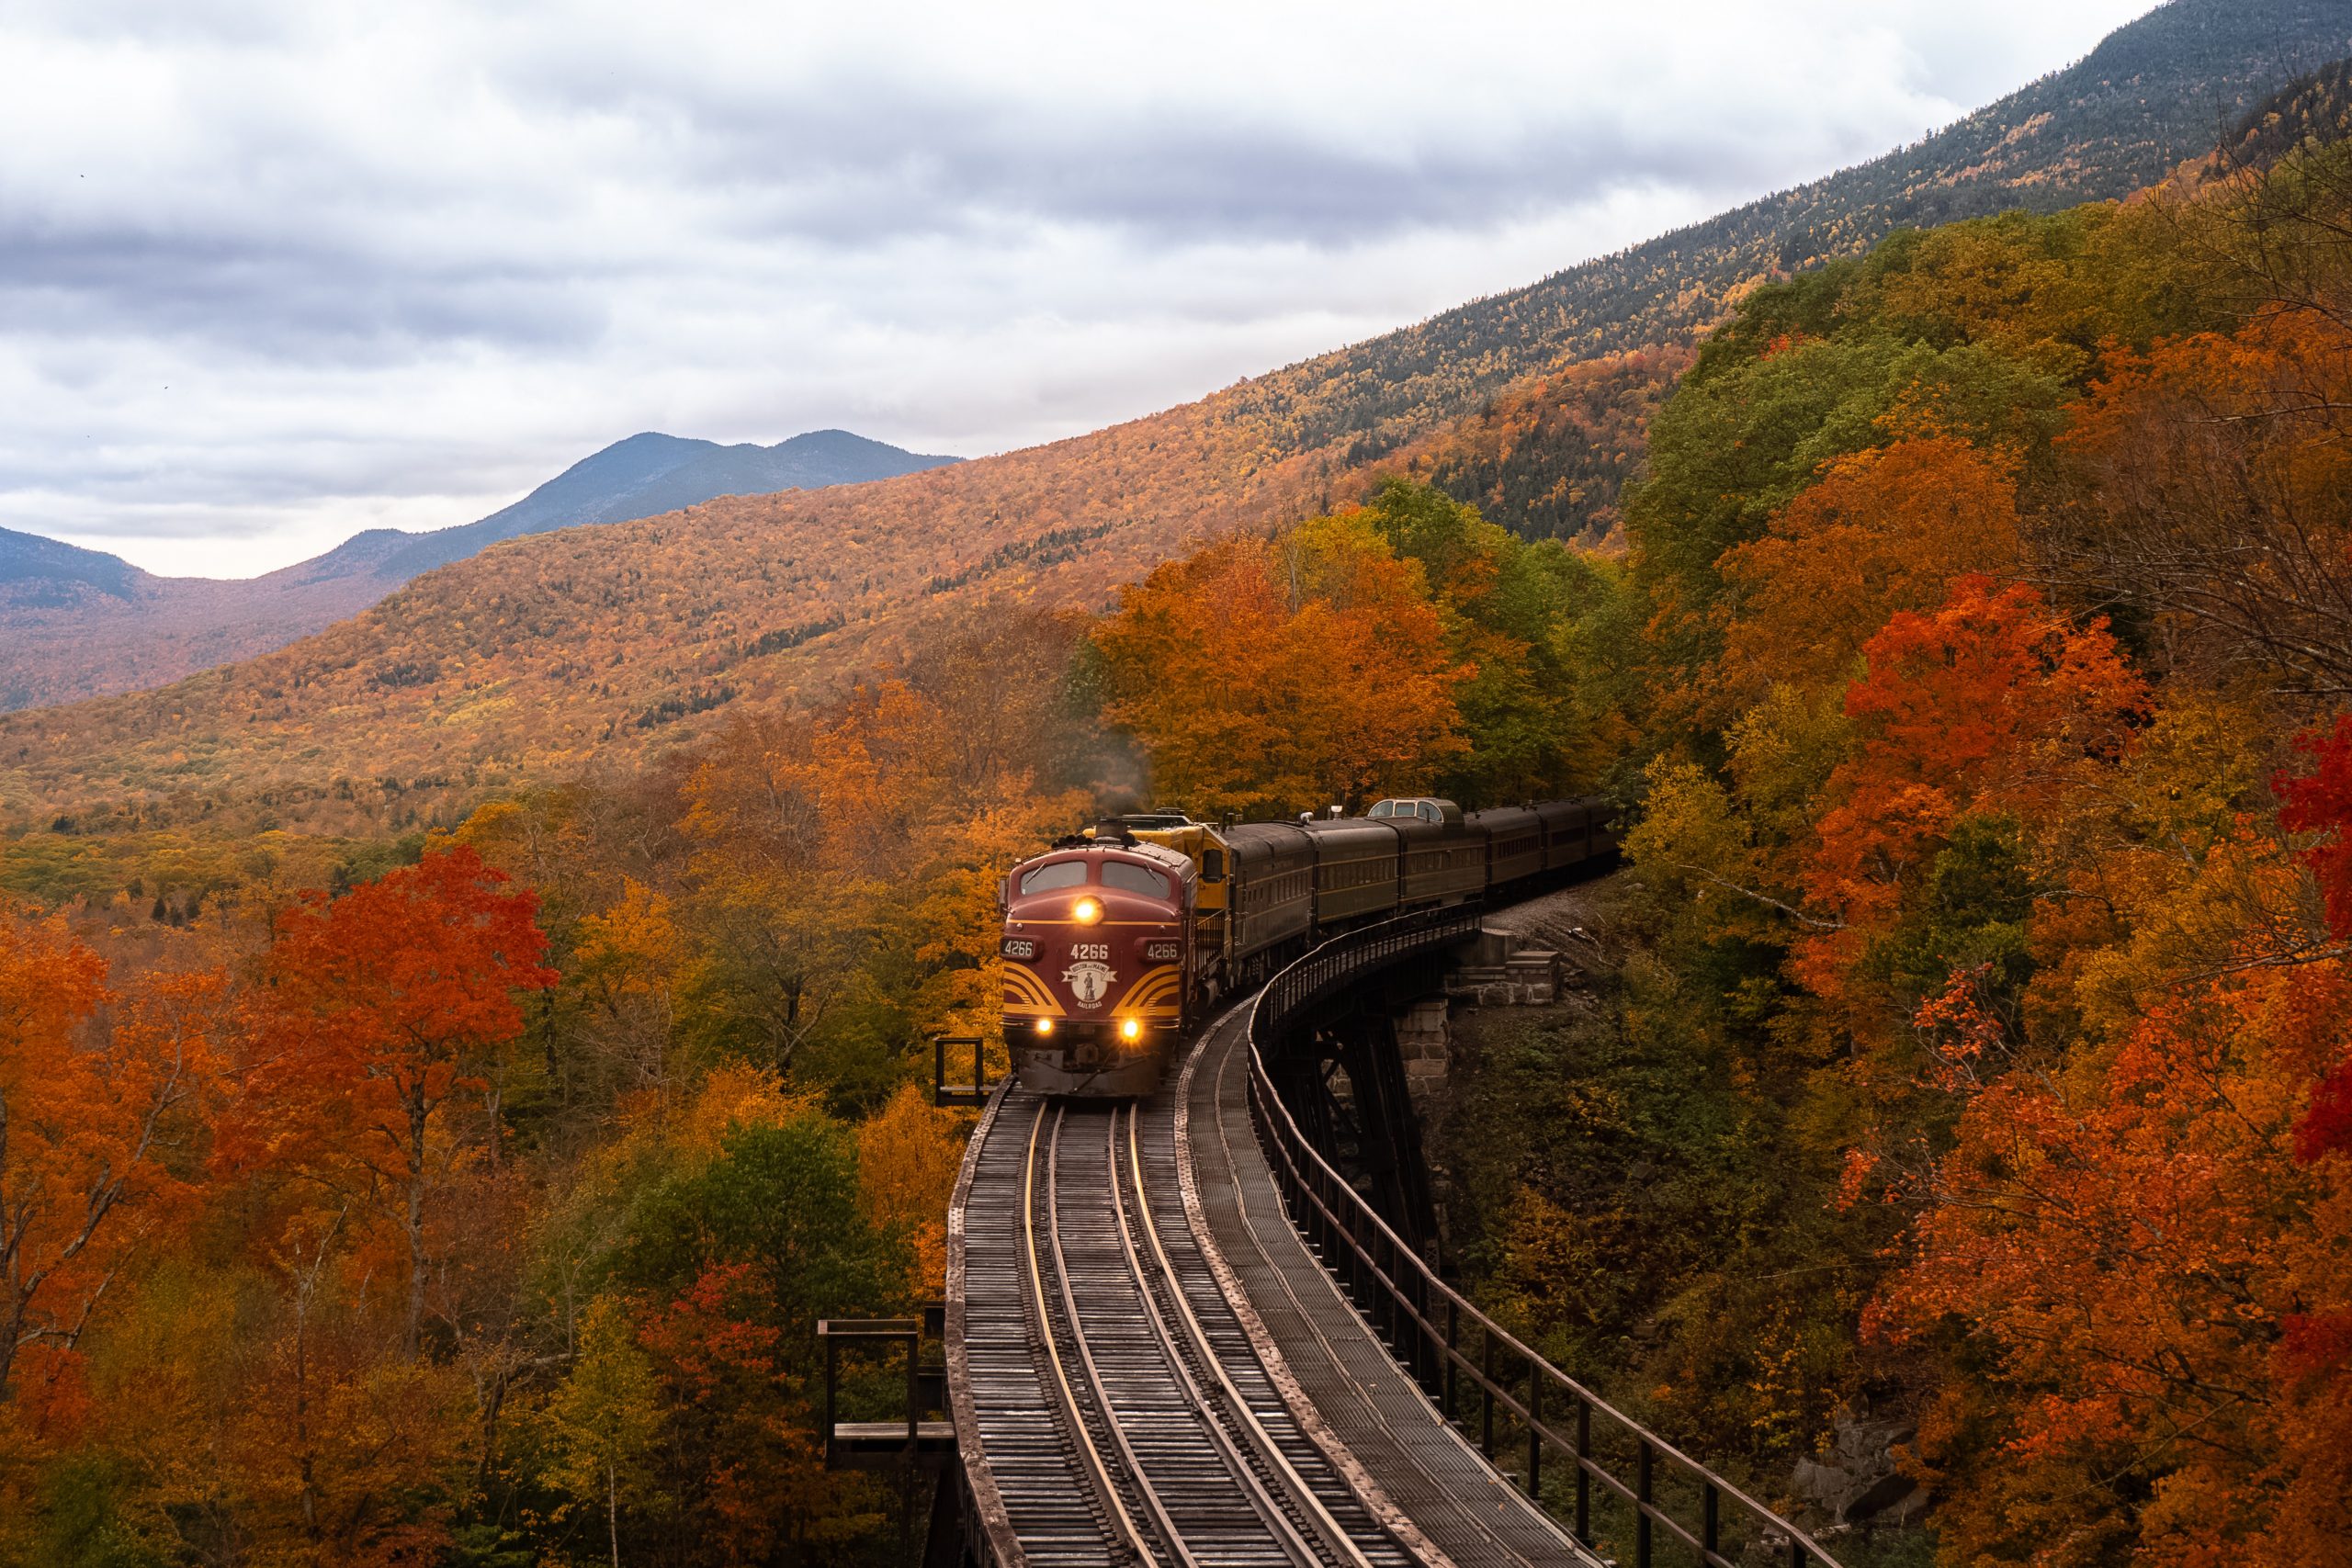 Train coming out of a tunnel in a colorful autumn scene in the mountains is used here to think of staying on track with our character choices